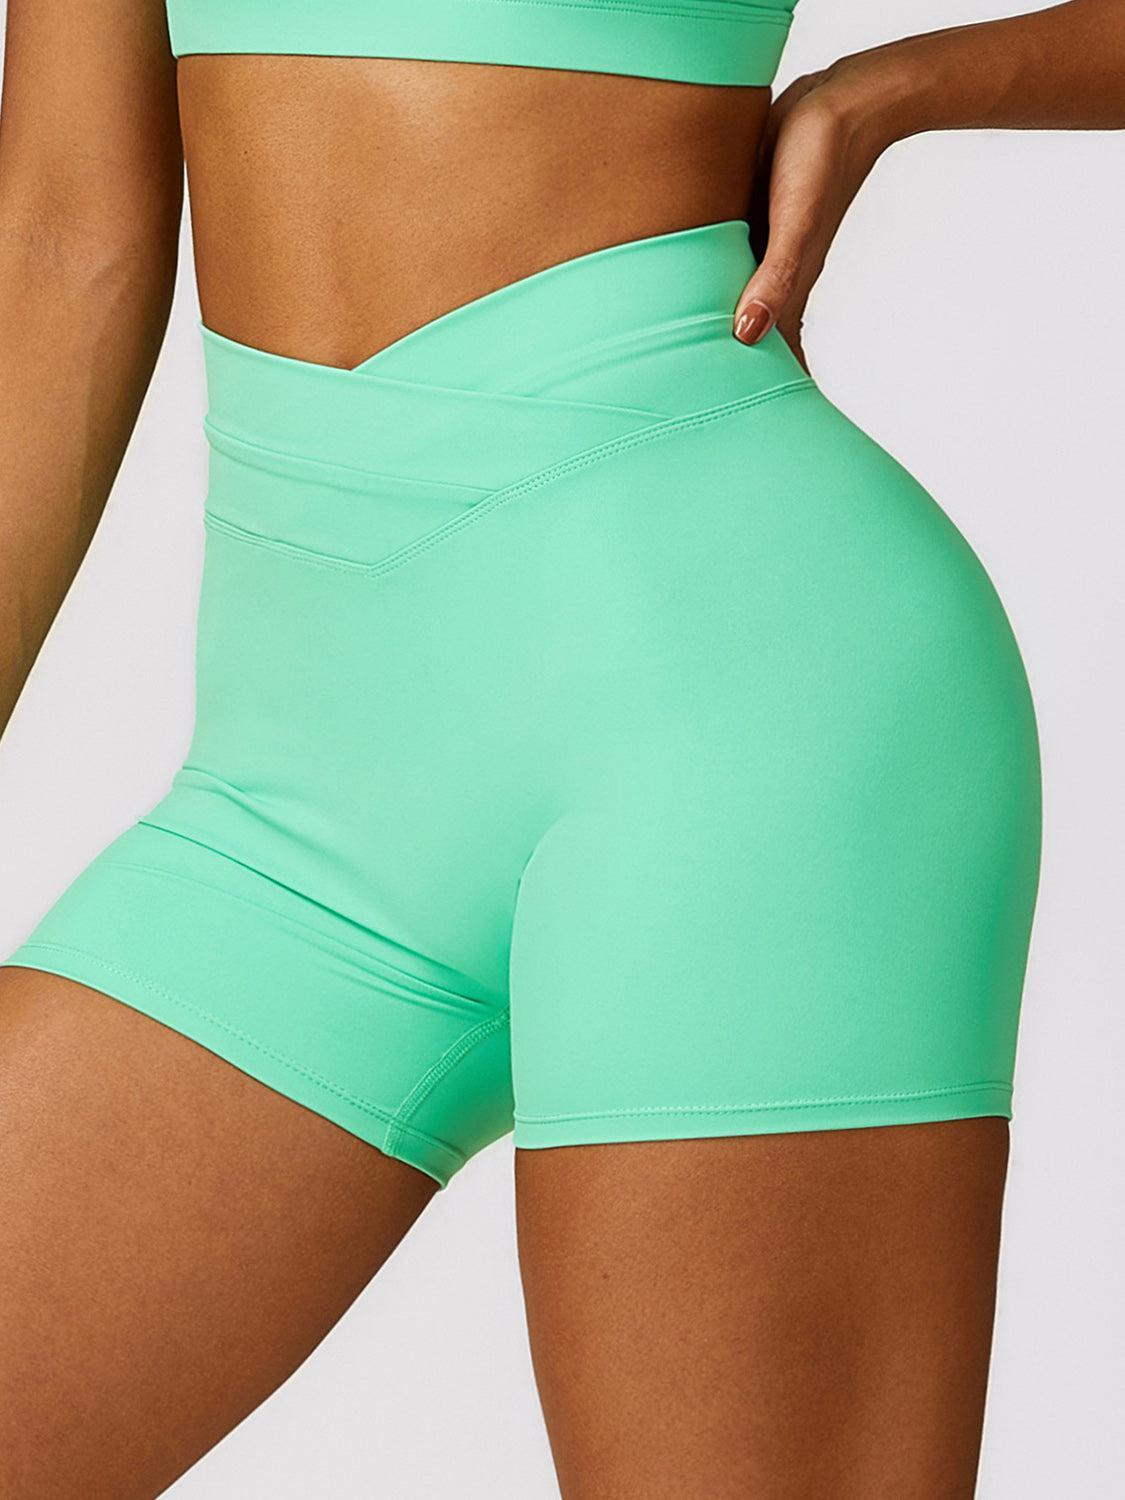 a close up of a person wearing a green shorts